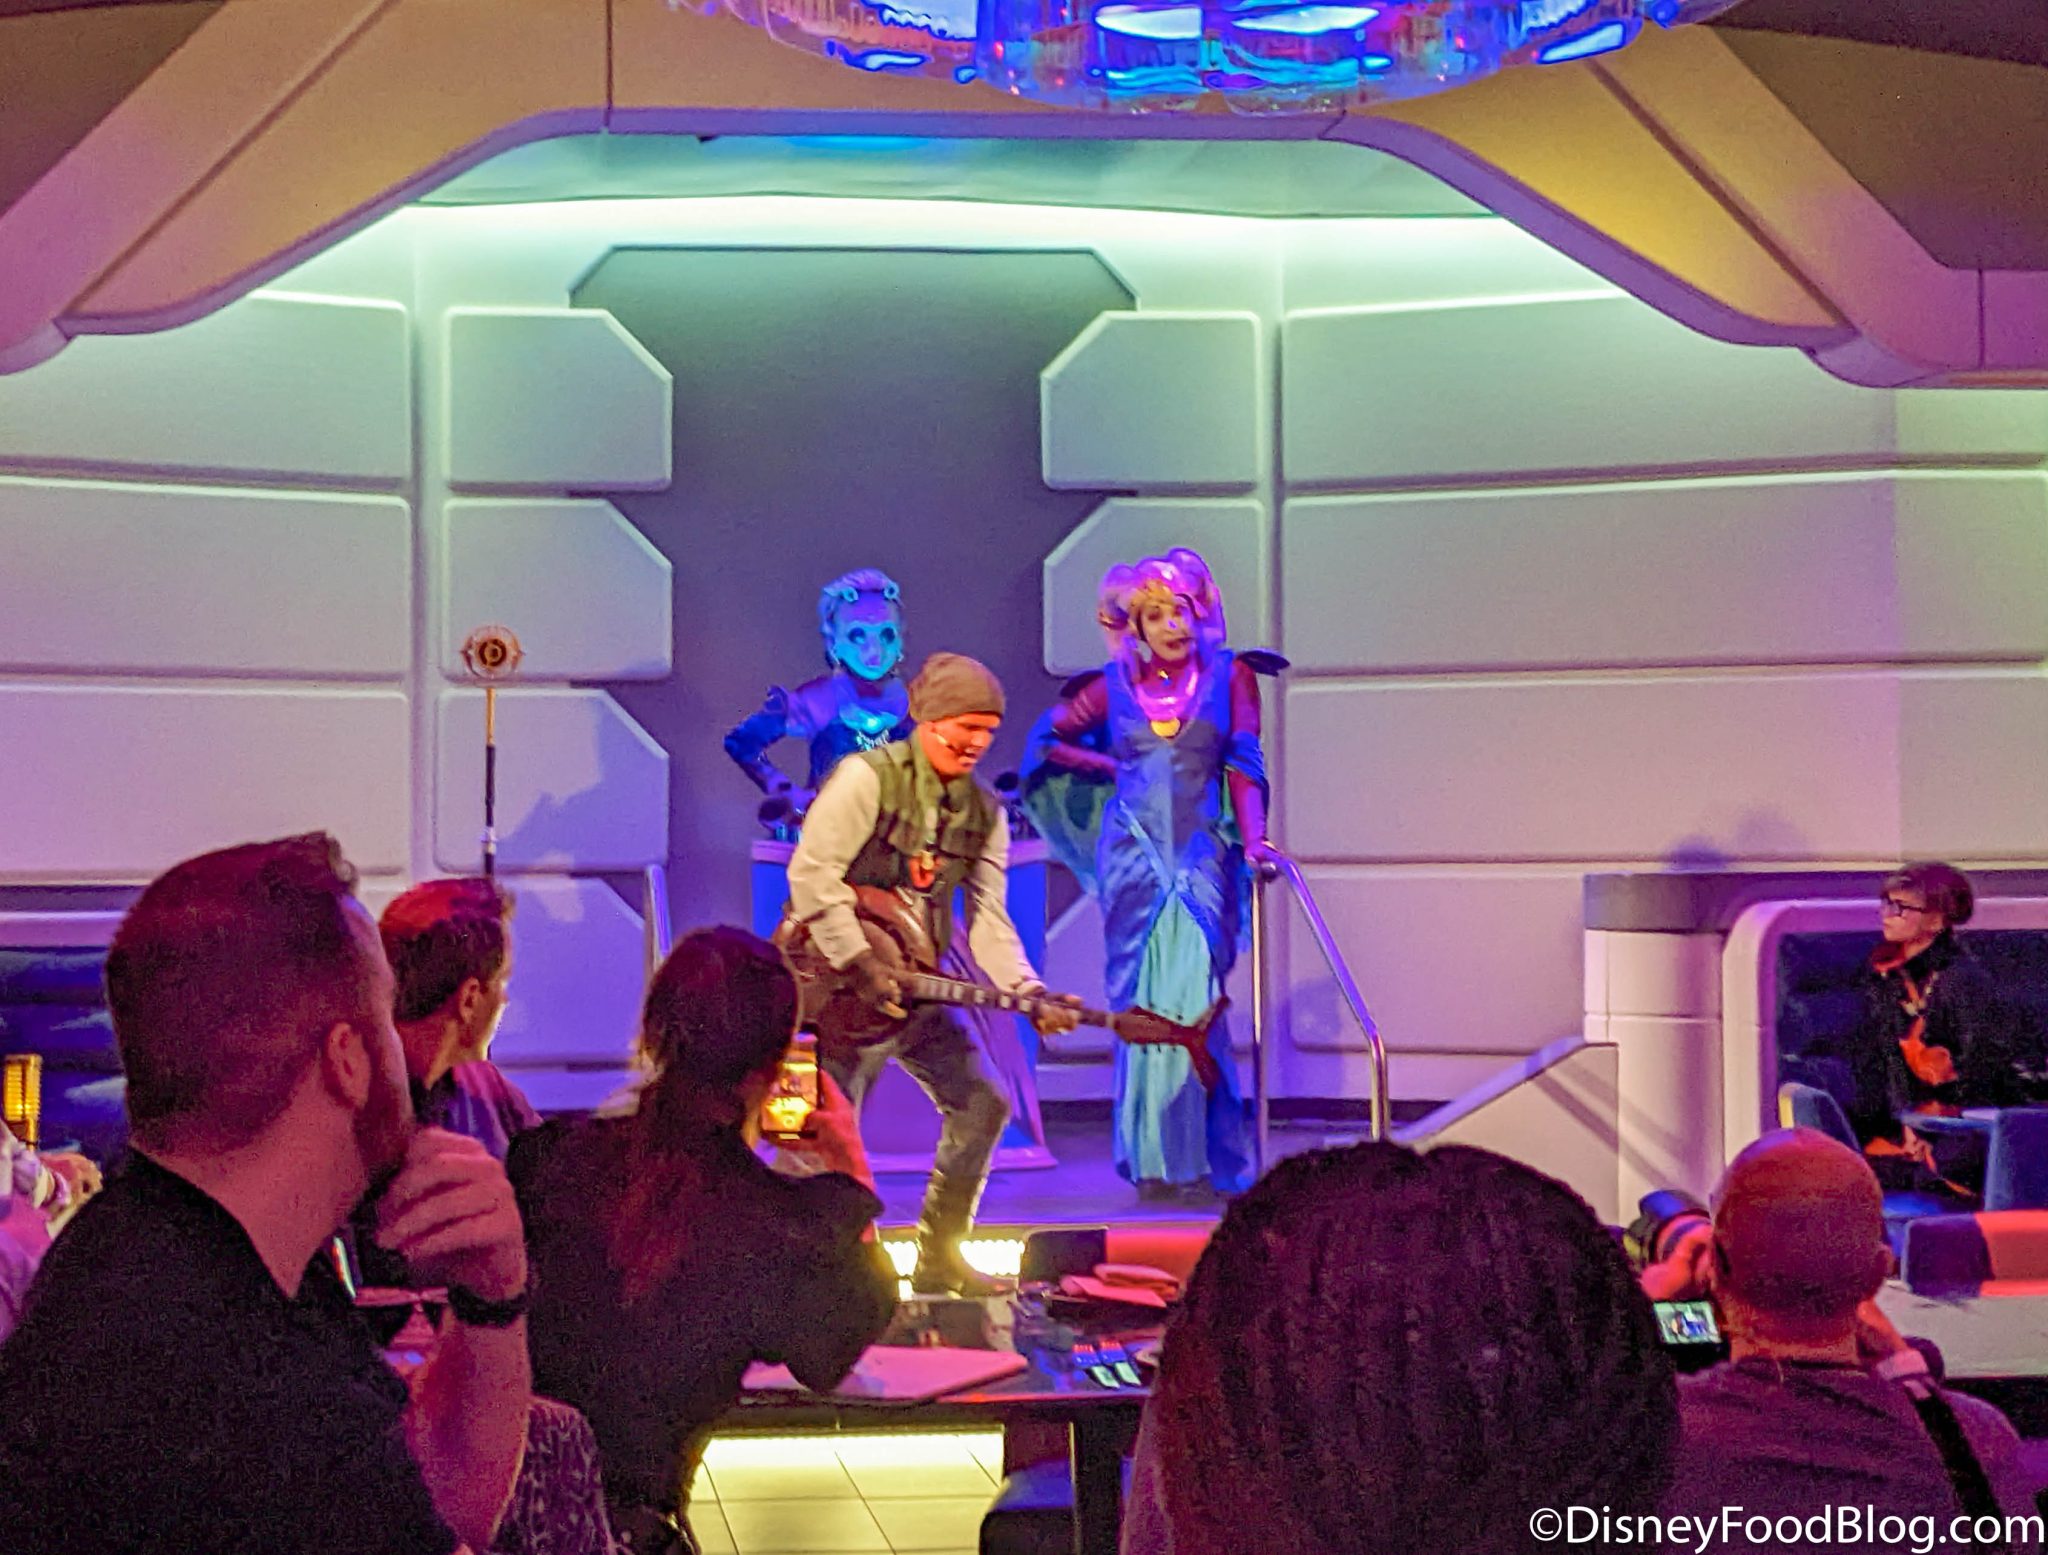 2022 Wdw Walt Disney World Star Wars Galactic Starcruiser Hotel Media Preview Dinner 1 Captains Table Crown Of Corellia Dining Room Gaya Ouannii Performing 94 2048x1555 